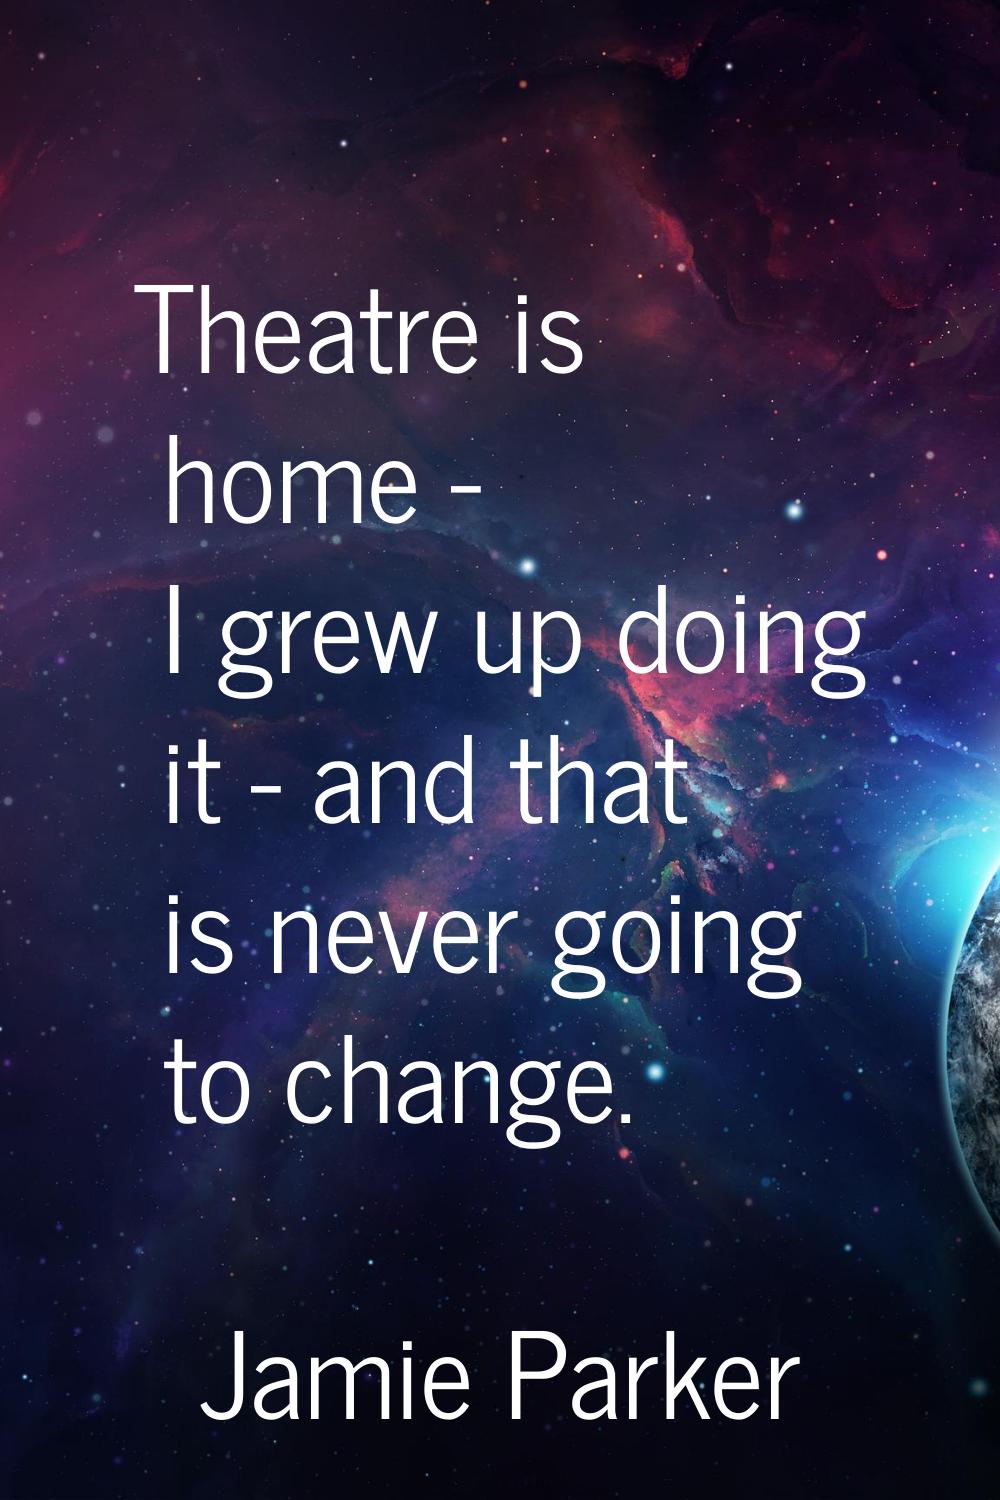 Theatre is home - I grew up doing it - and that is never going to change.